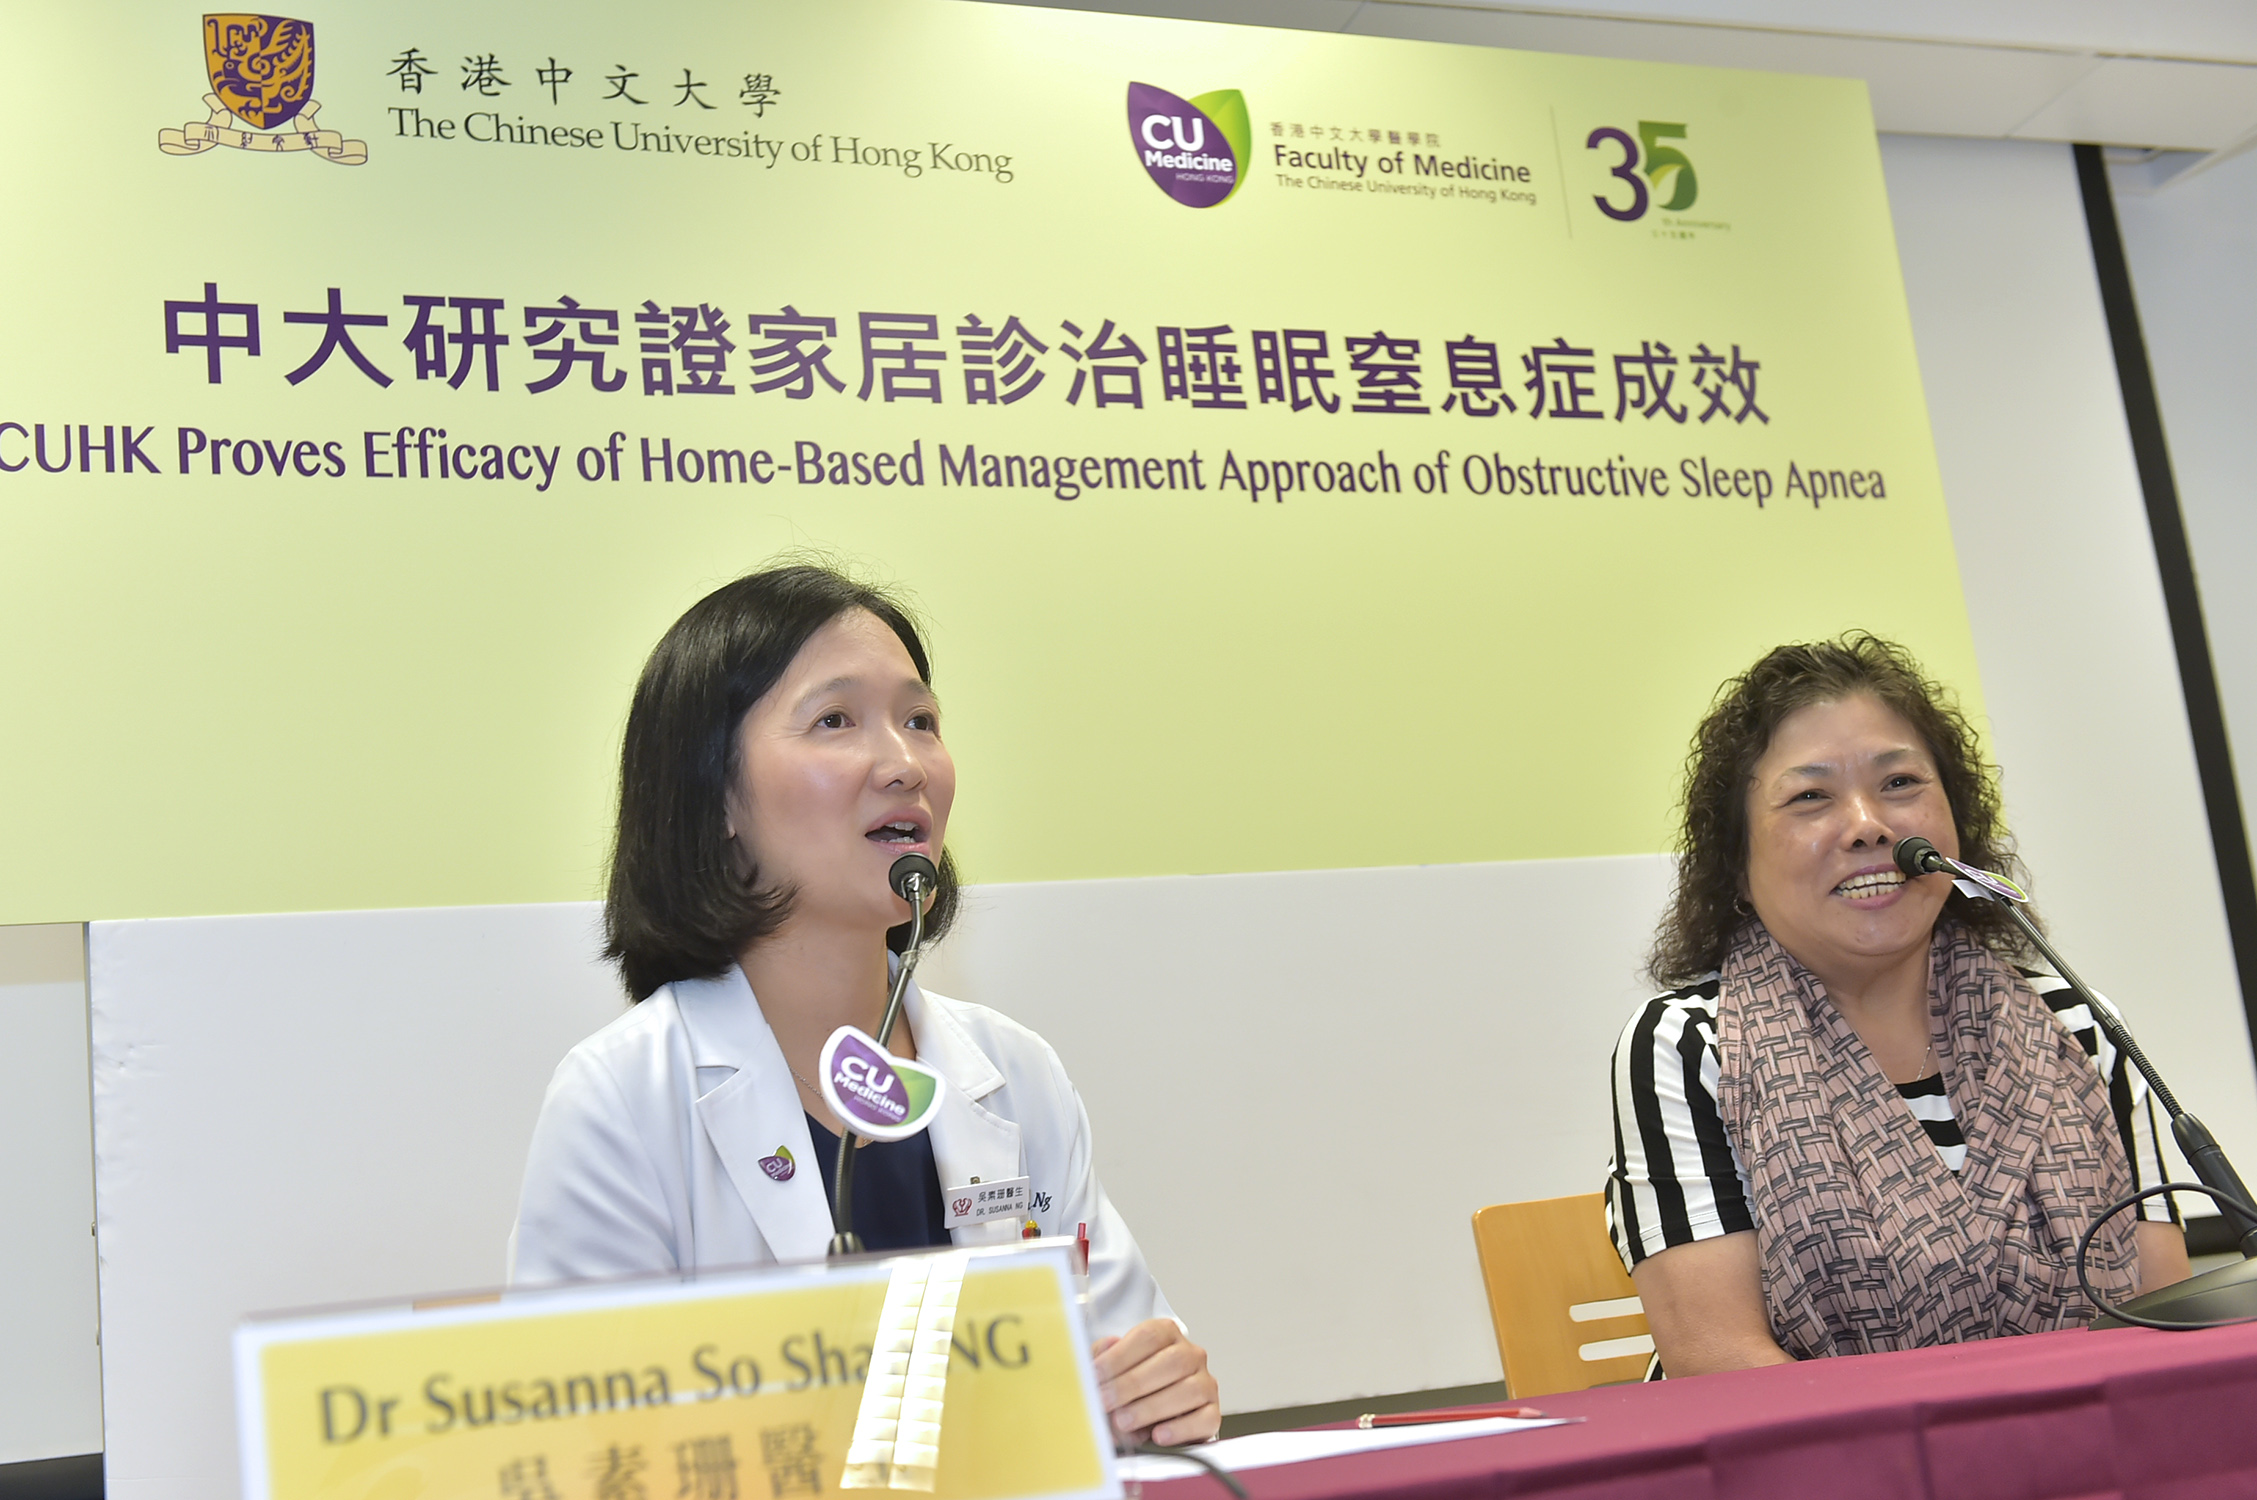  Madam Tsoi (right) had undergone home sleep test study and was diagnosed with moderate OSA. She finds the ambulatory devices easy to operate with comprehensive instructions given by medical staff.